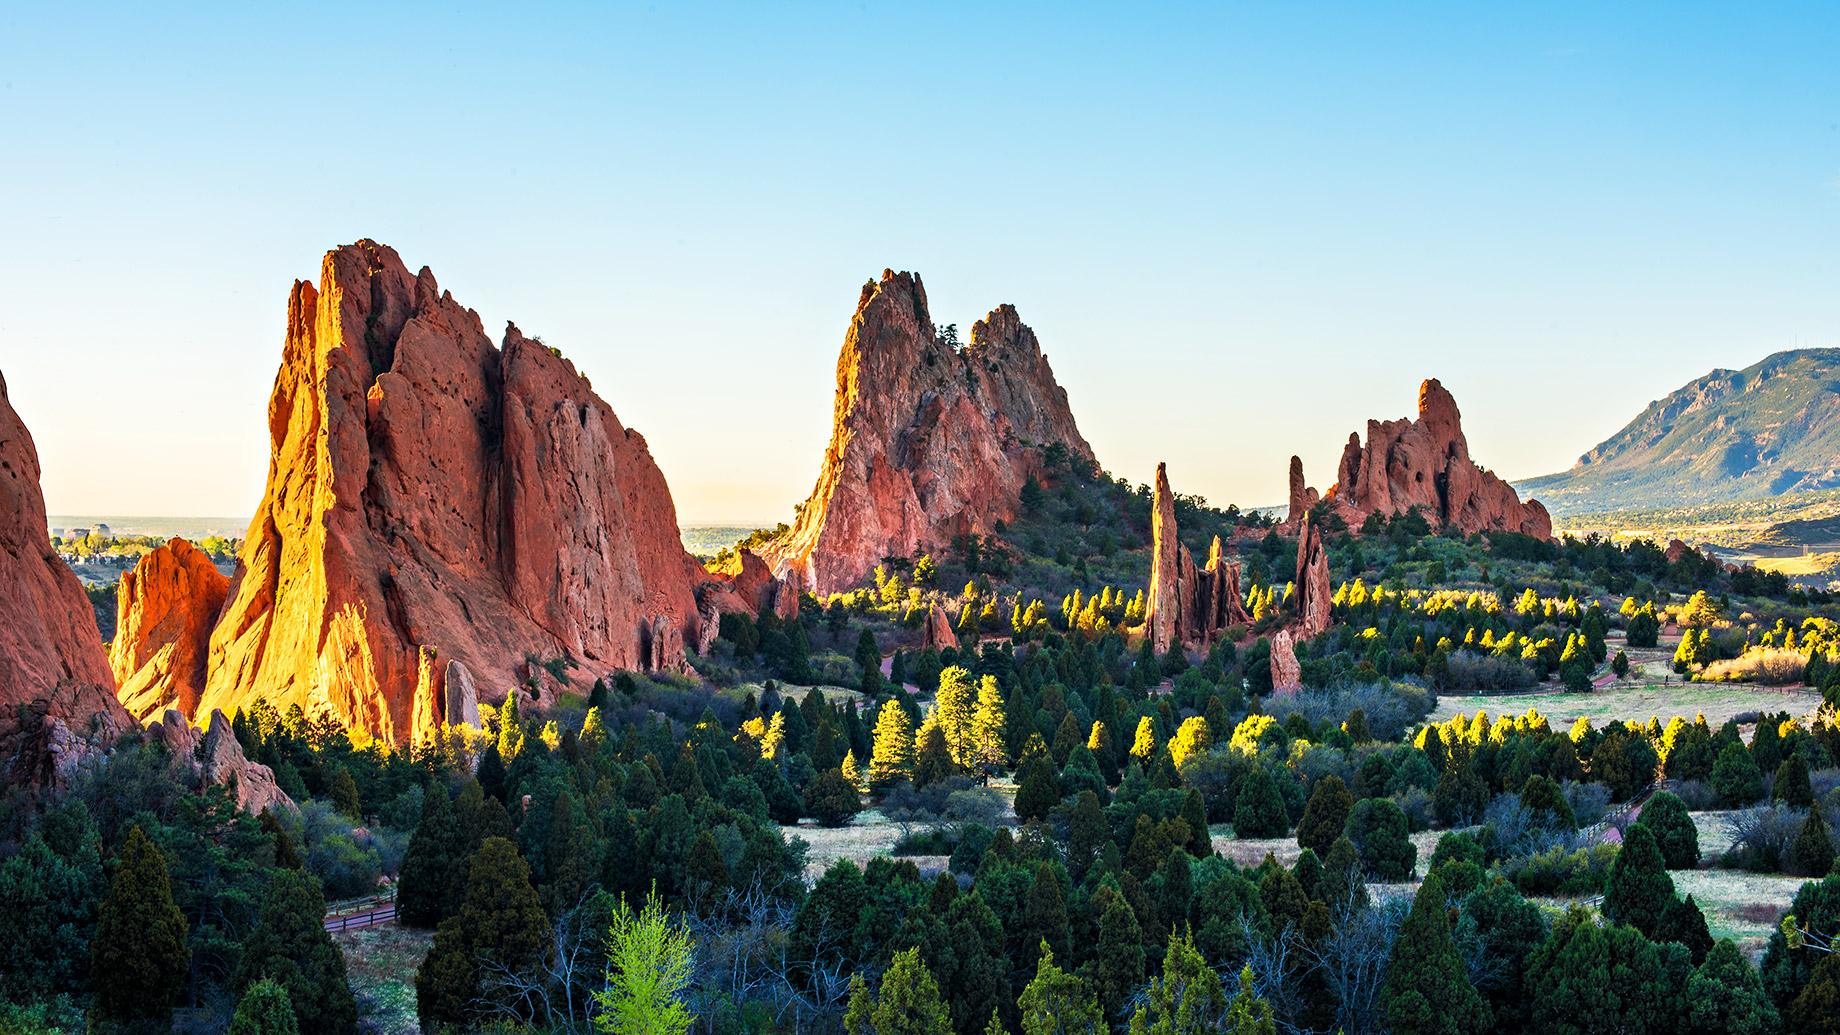 Sunrise at the Garden of the Gods in Colorado Springs, CO, USA